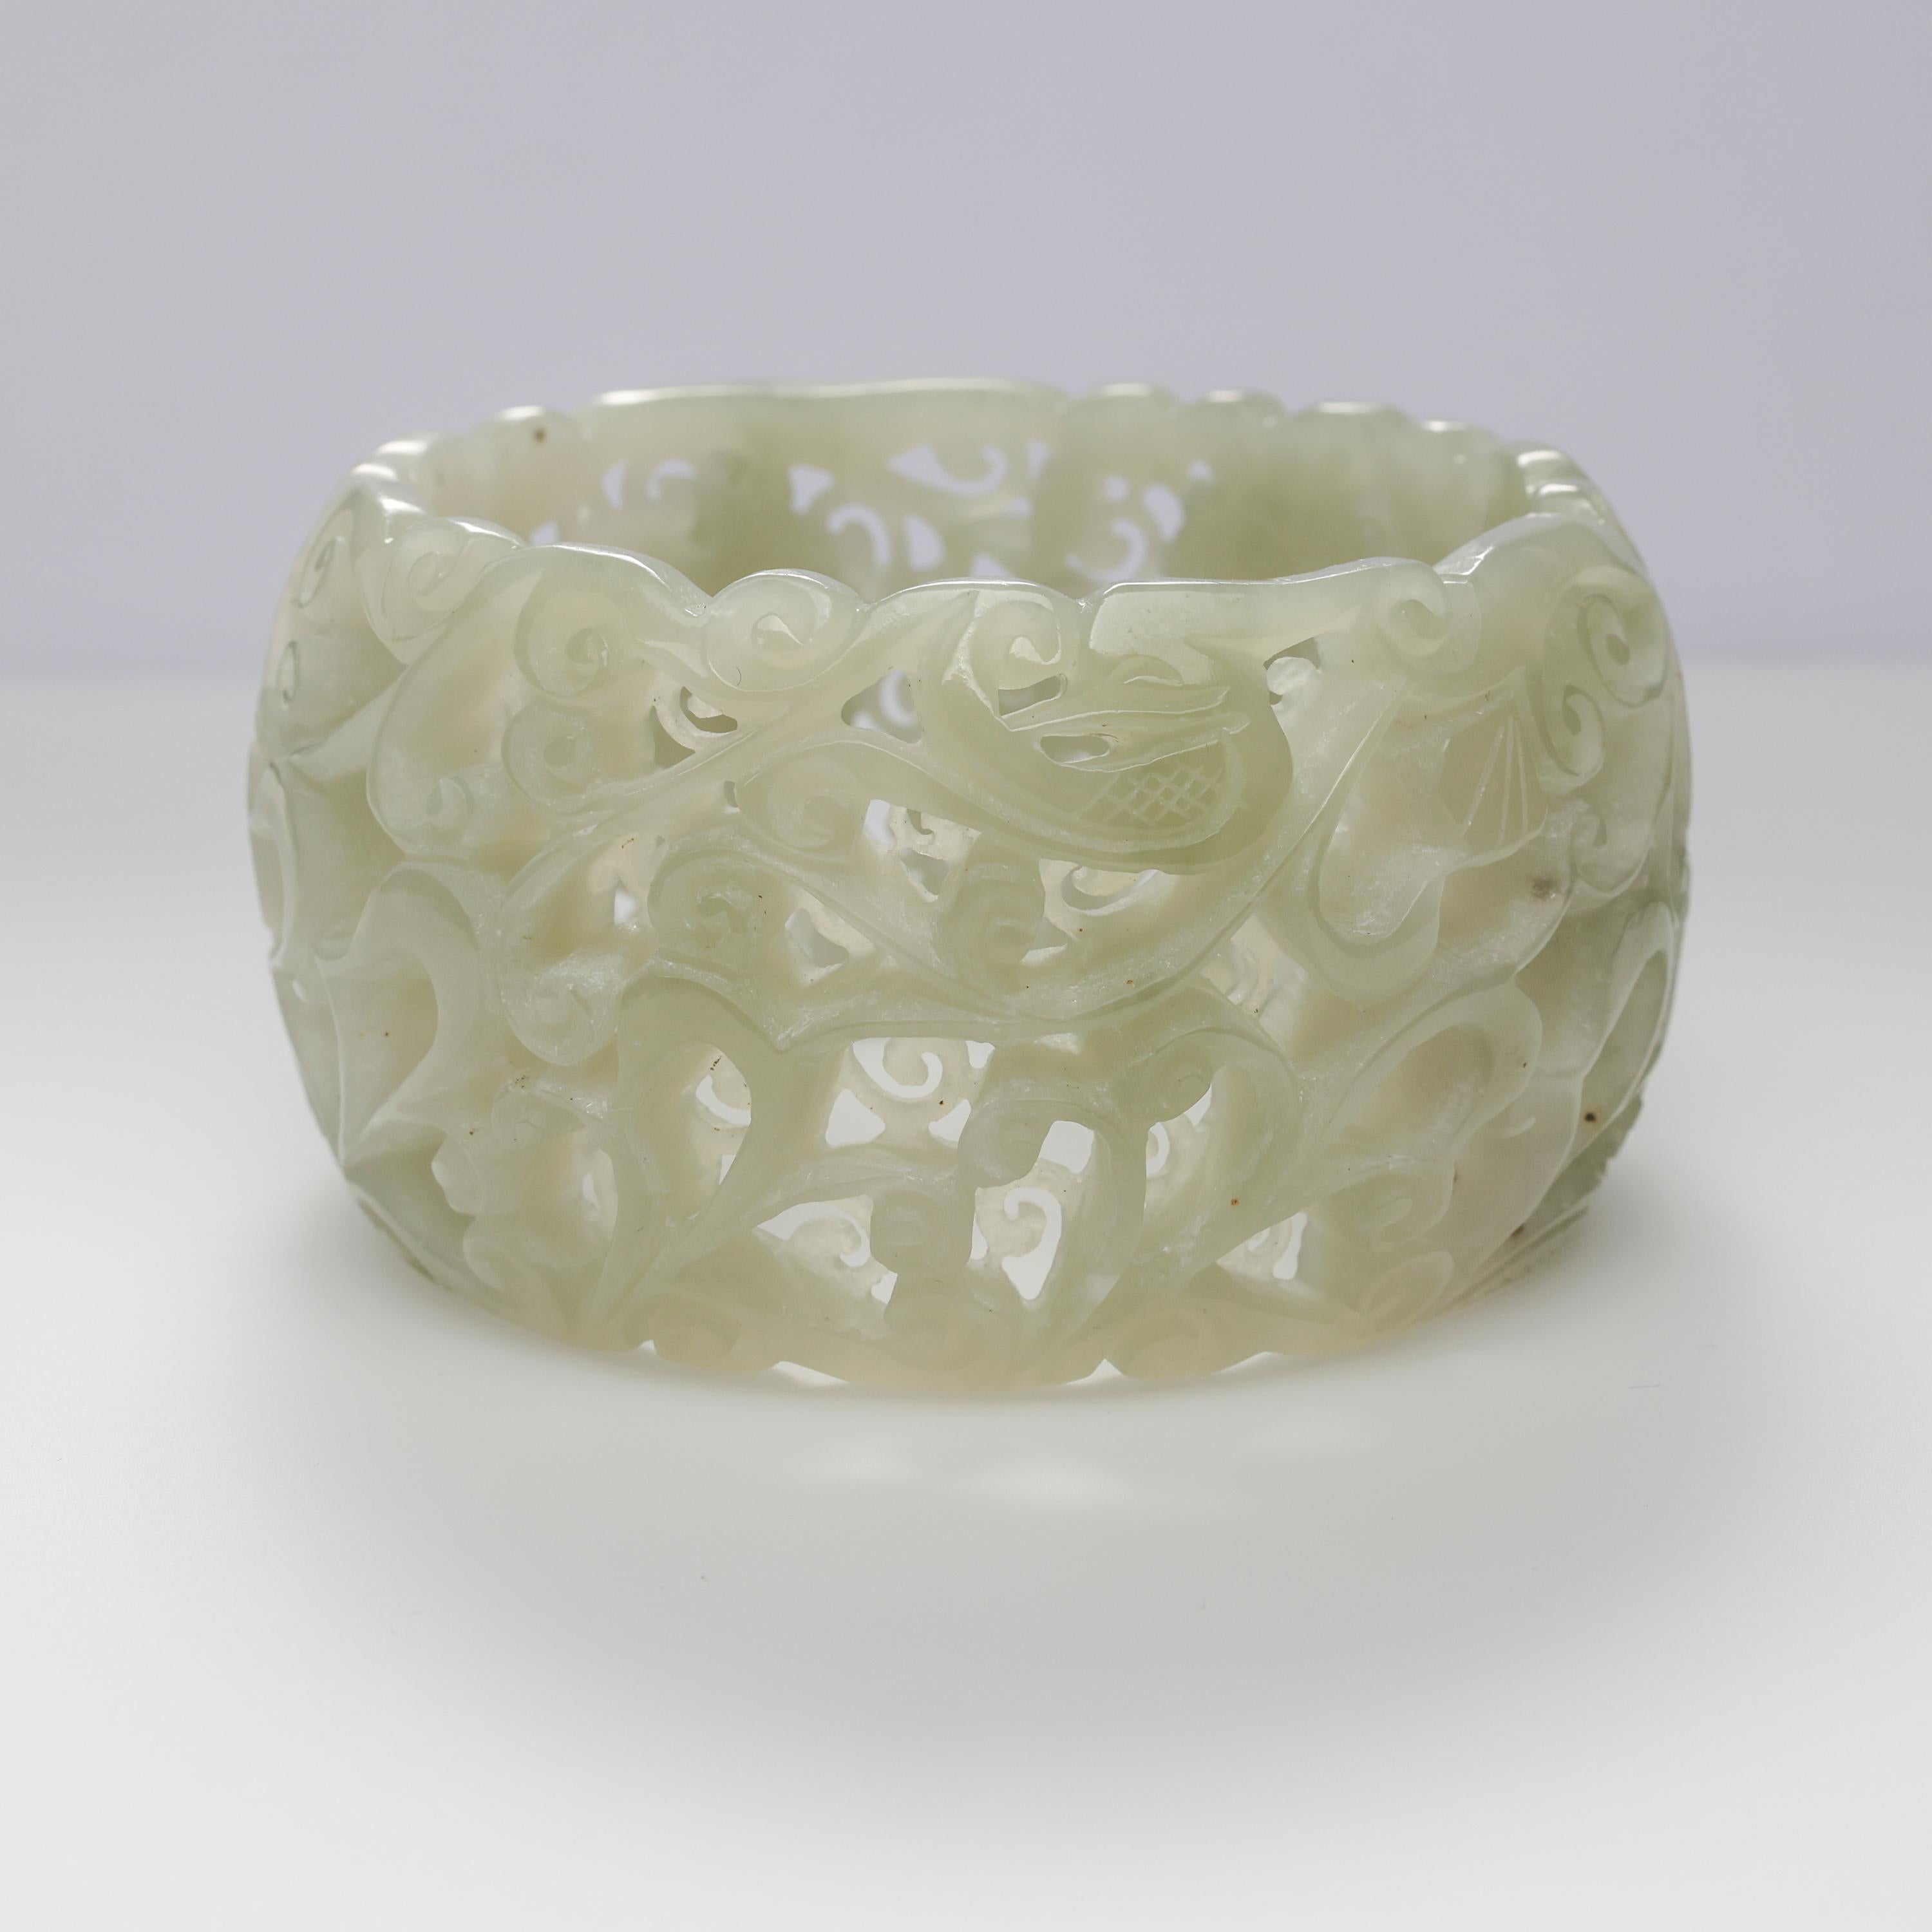 This large white nephrite jade bangle is simply astonishing. Expressively -and intricately- hand-carved and pierced with leaves, blossoms, ruyi mushrooms, and decorative leaves and swirls, the 43mm wide cuff is carved in two laters: the outer layer